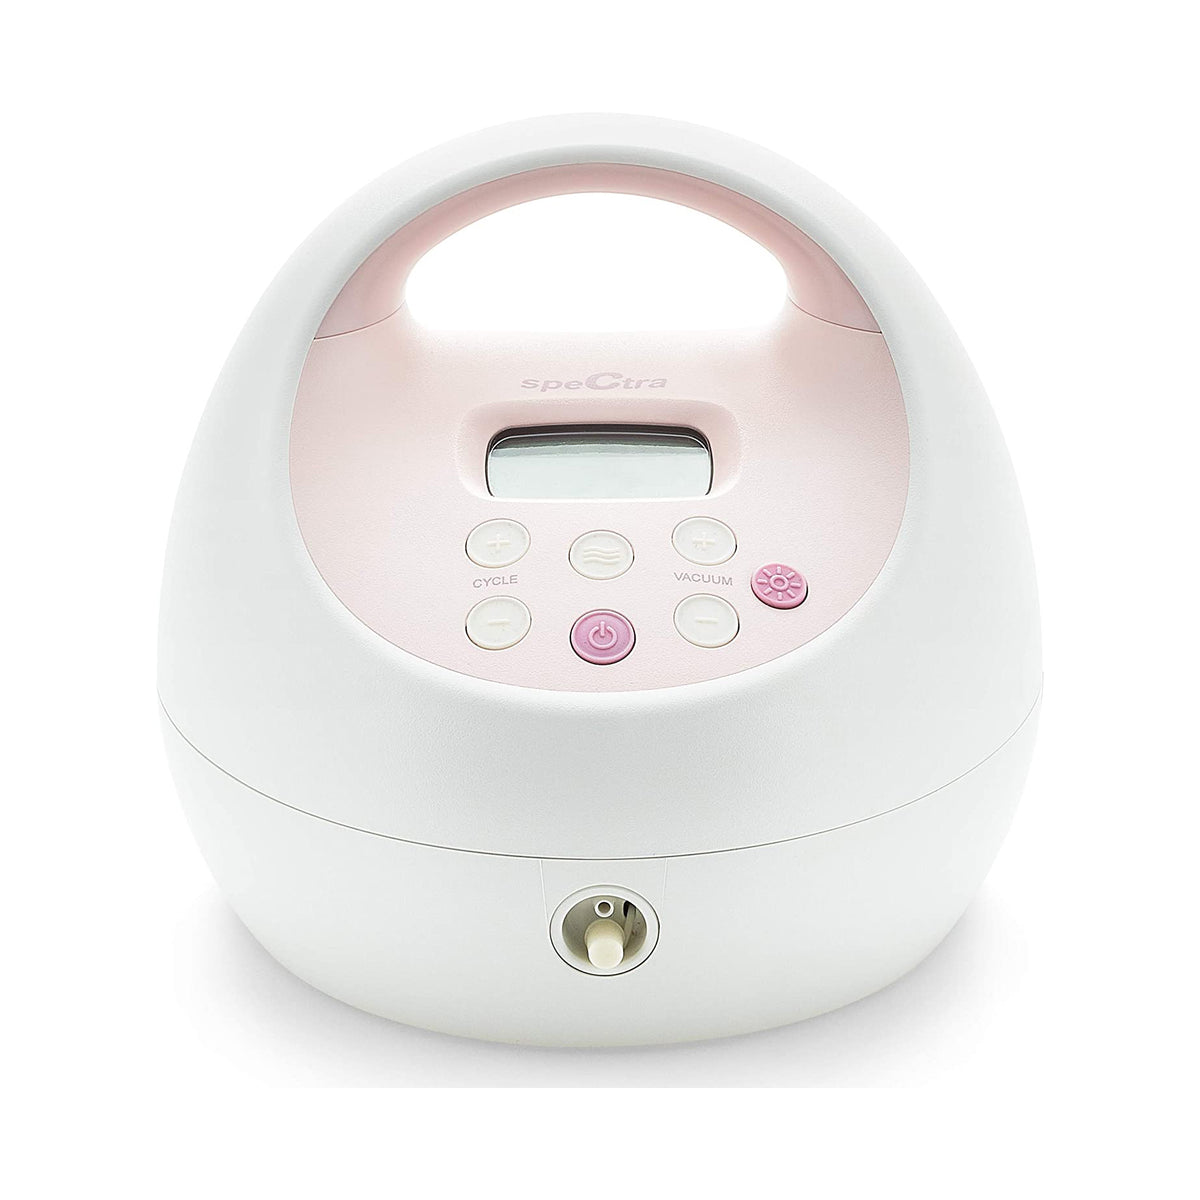 Spectra S1 Double Electric, Portable Breast Pump – Spectra Baby UK